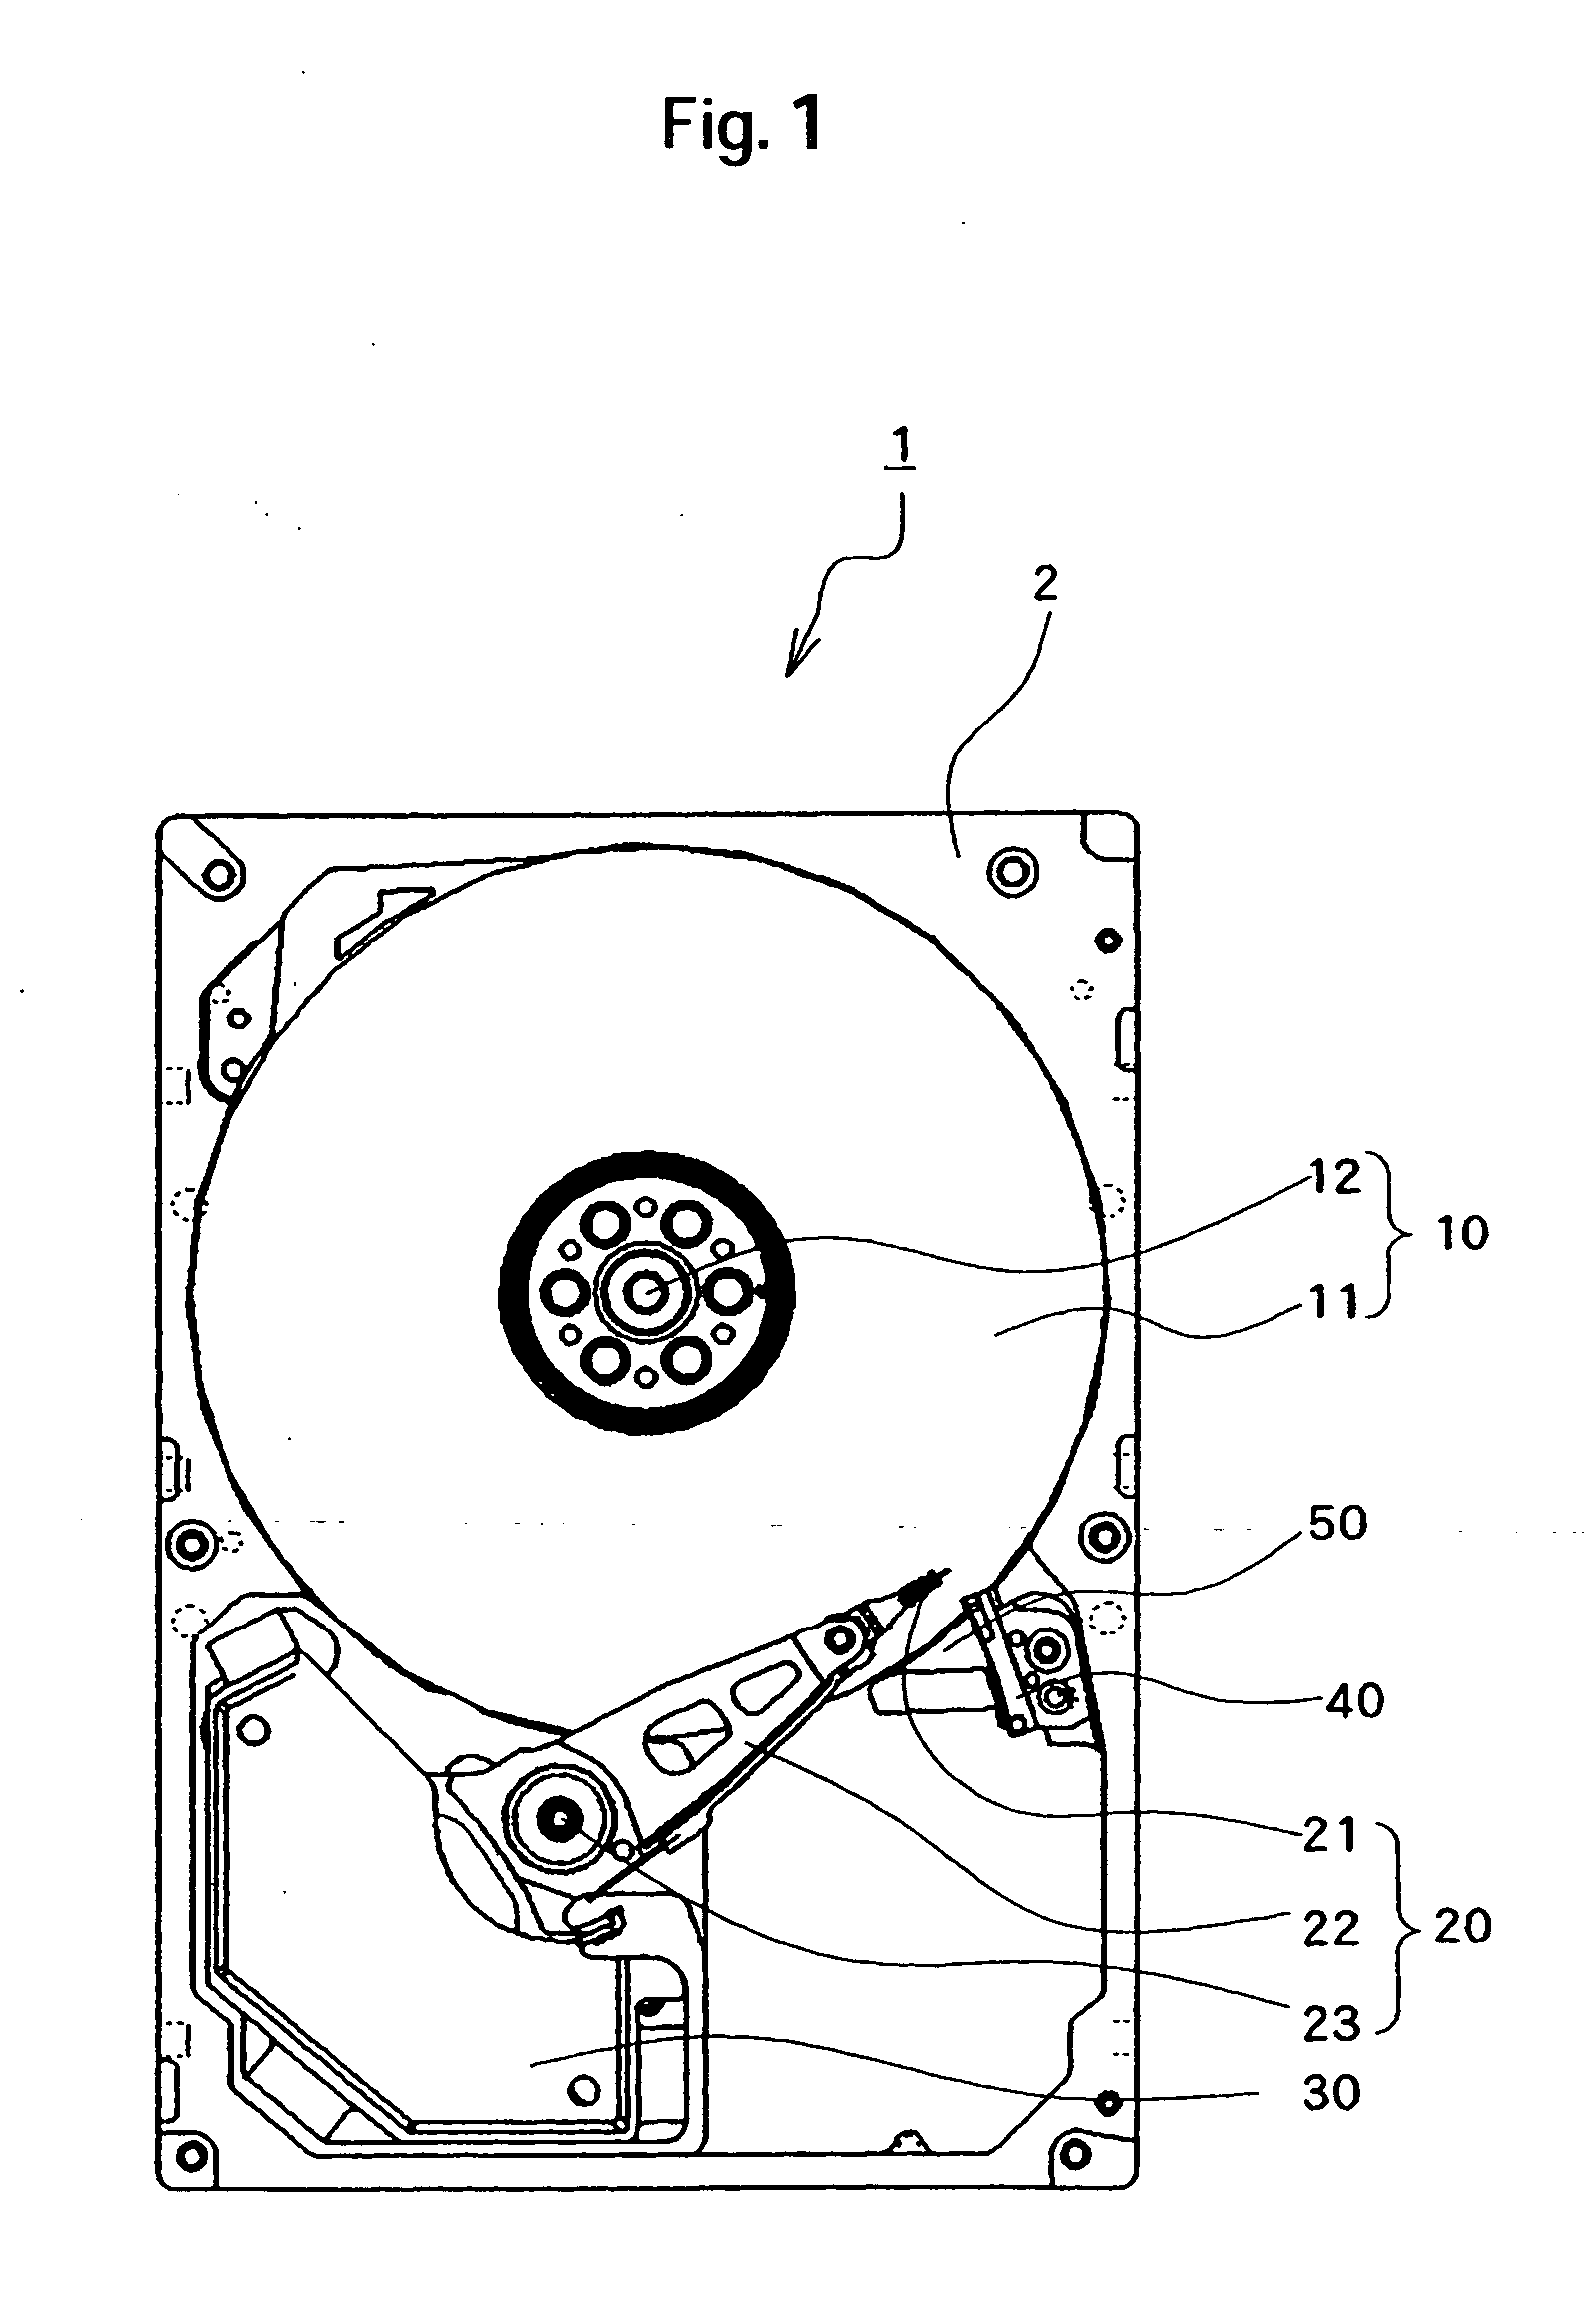 Magnetic disk drive and ramp